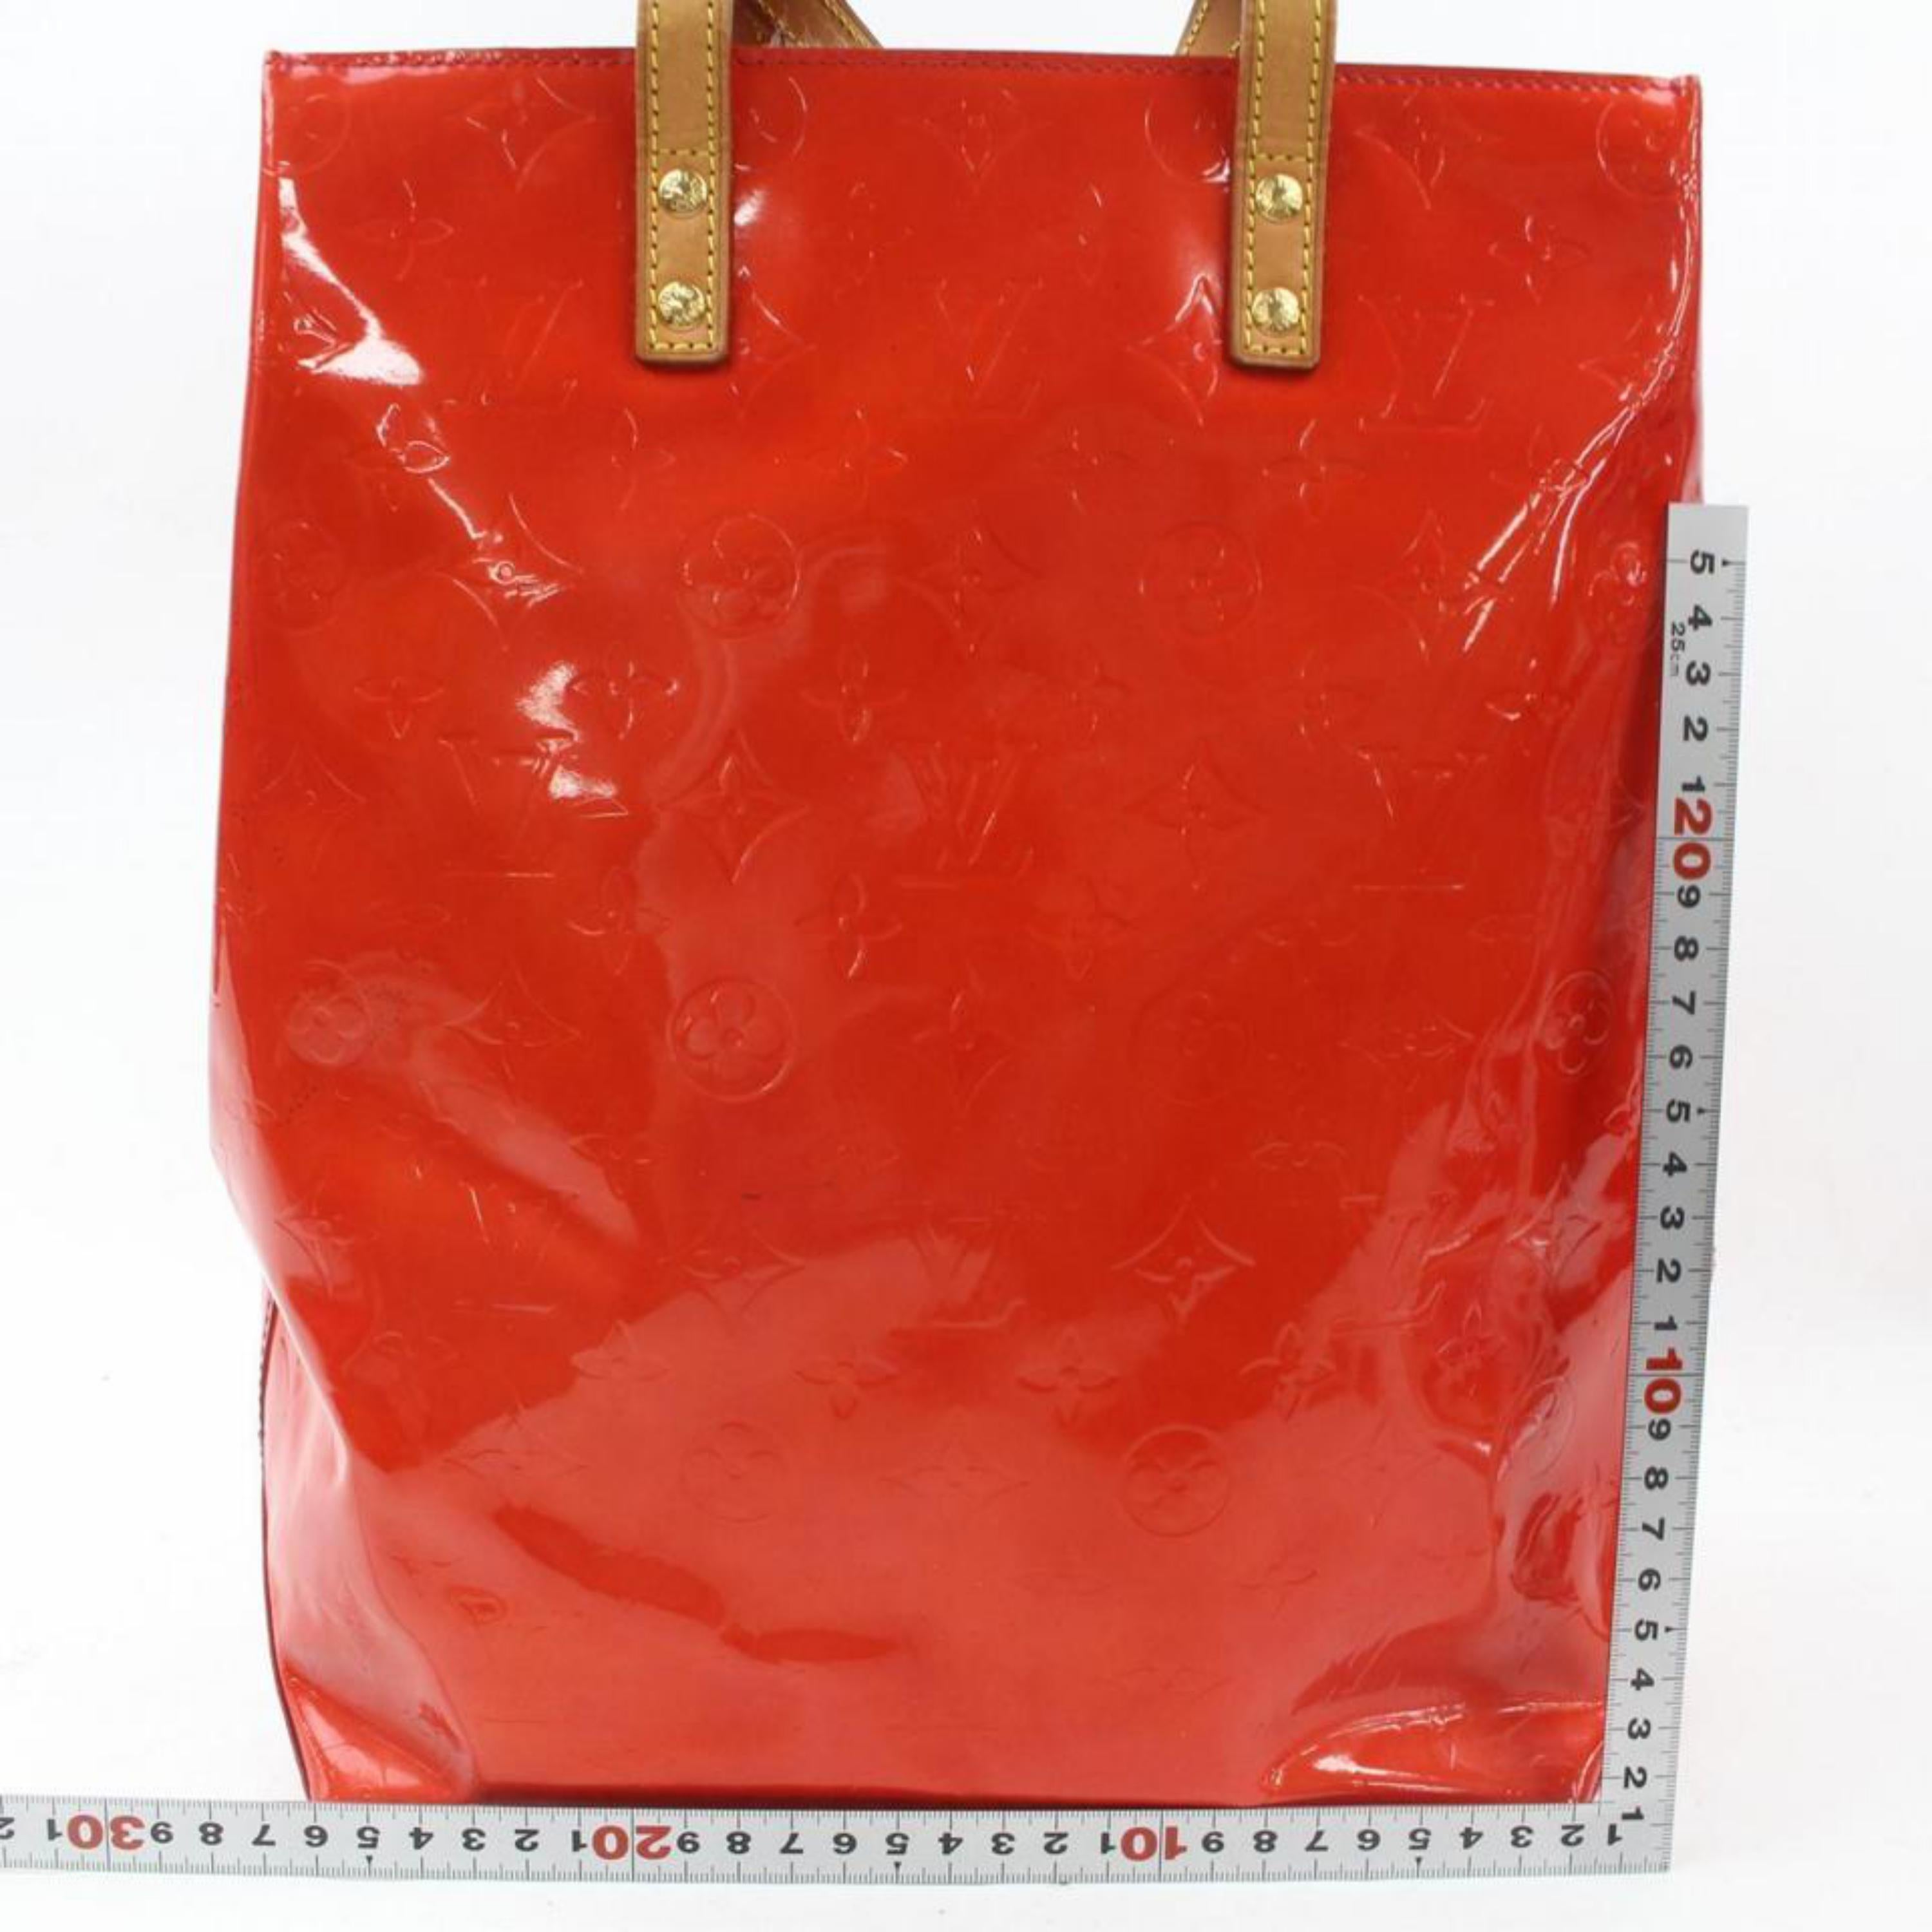 Louis Vuitton Reade Monogram Vernis Mm 869298 Red Patent Leather Tote For Sale 3